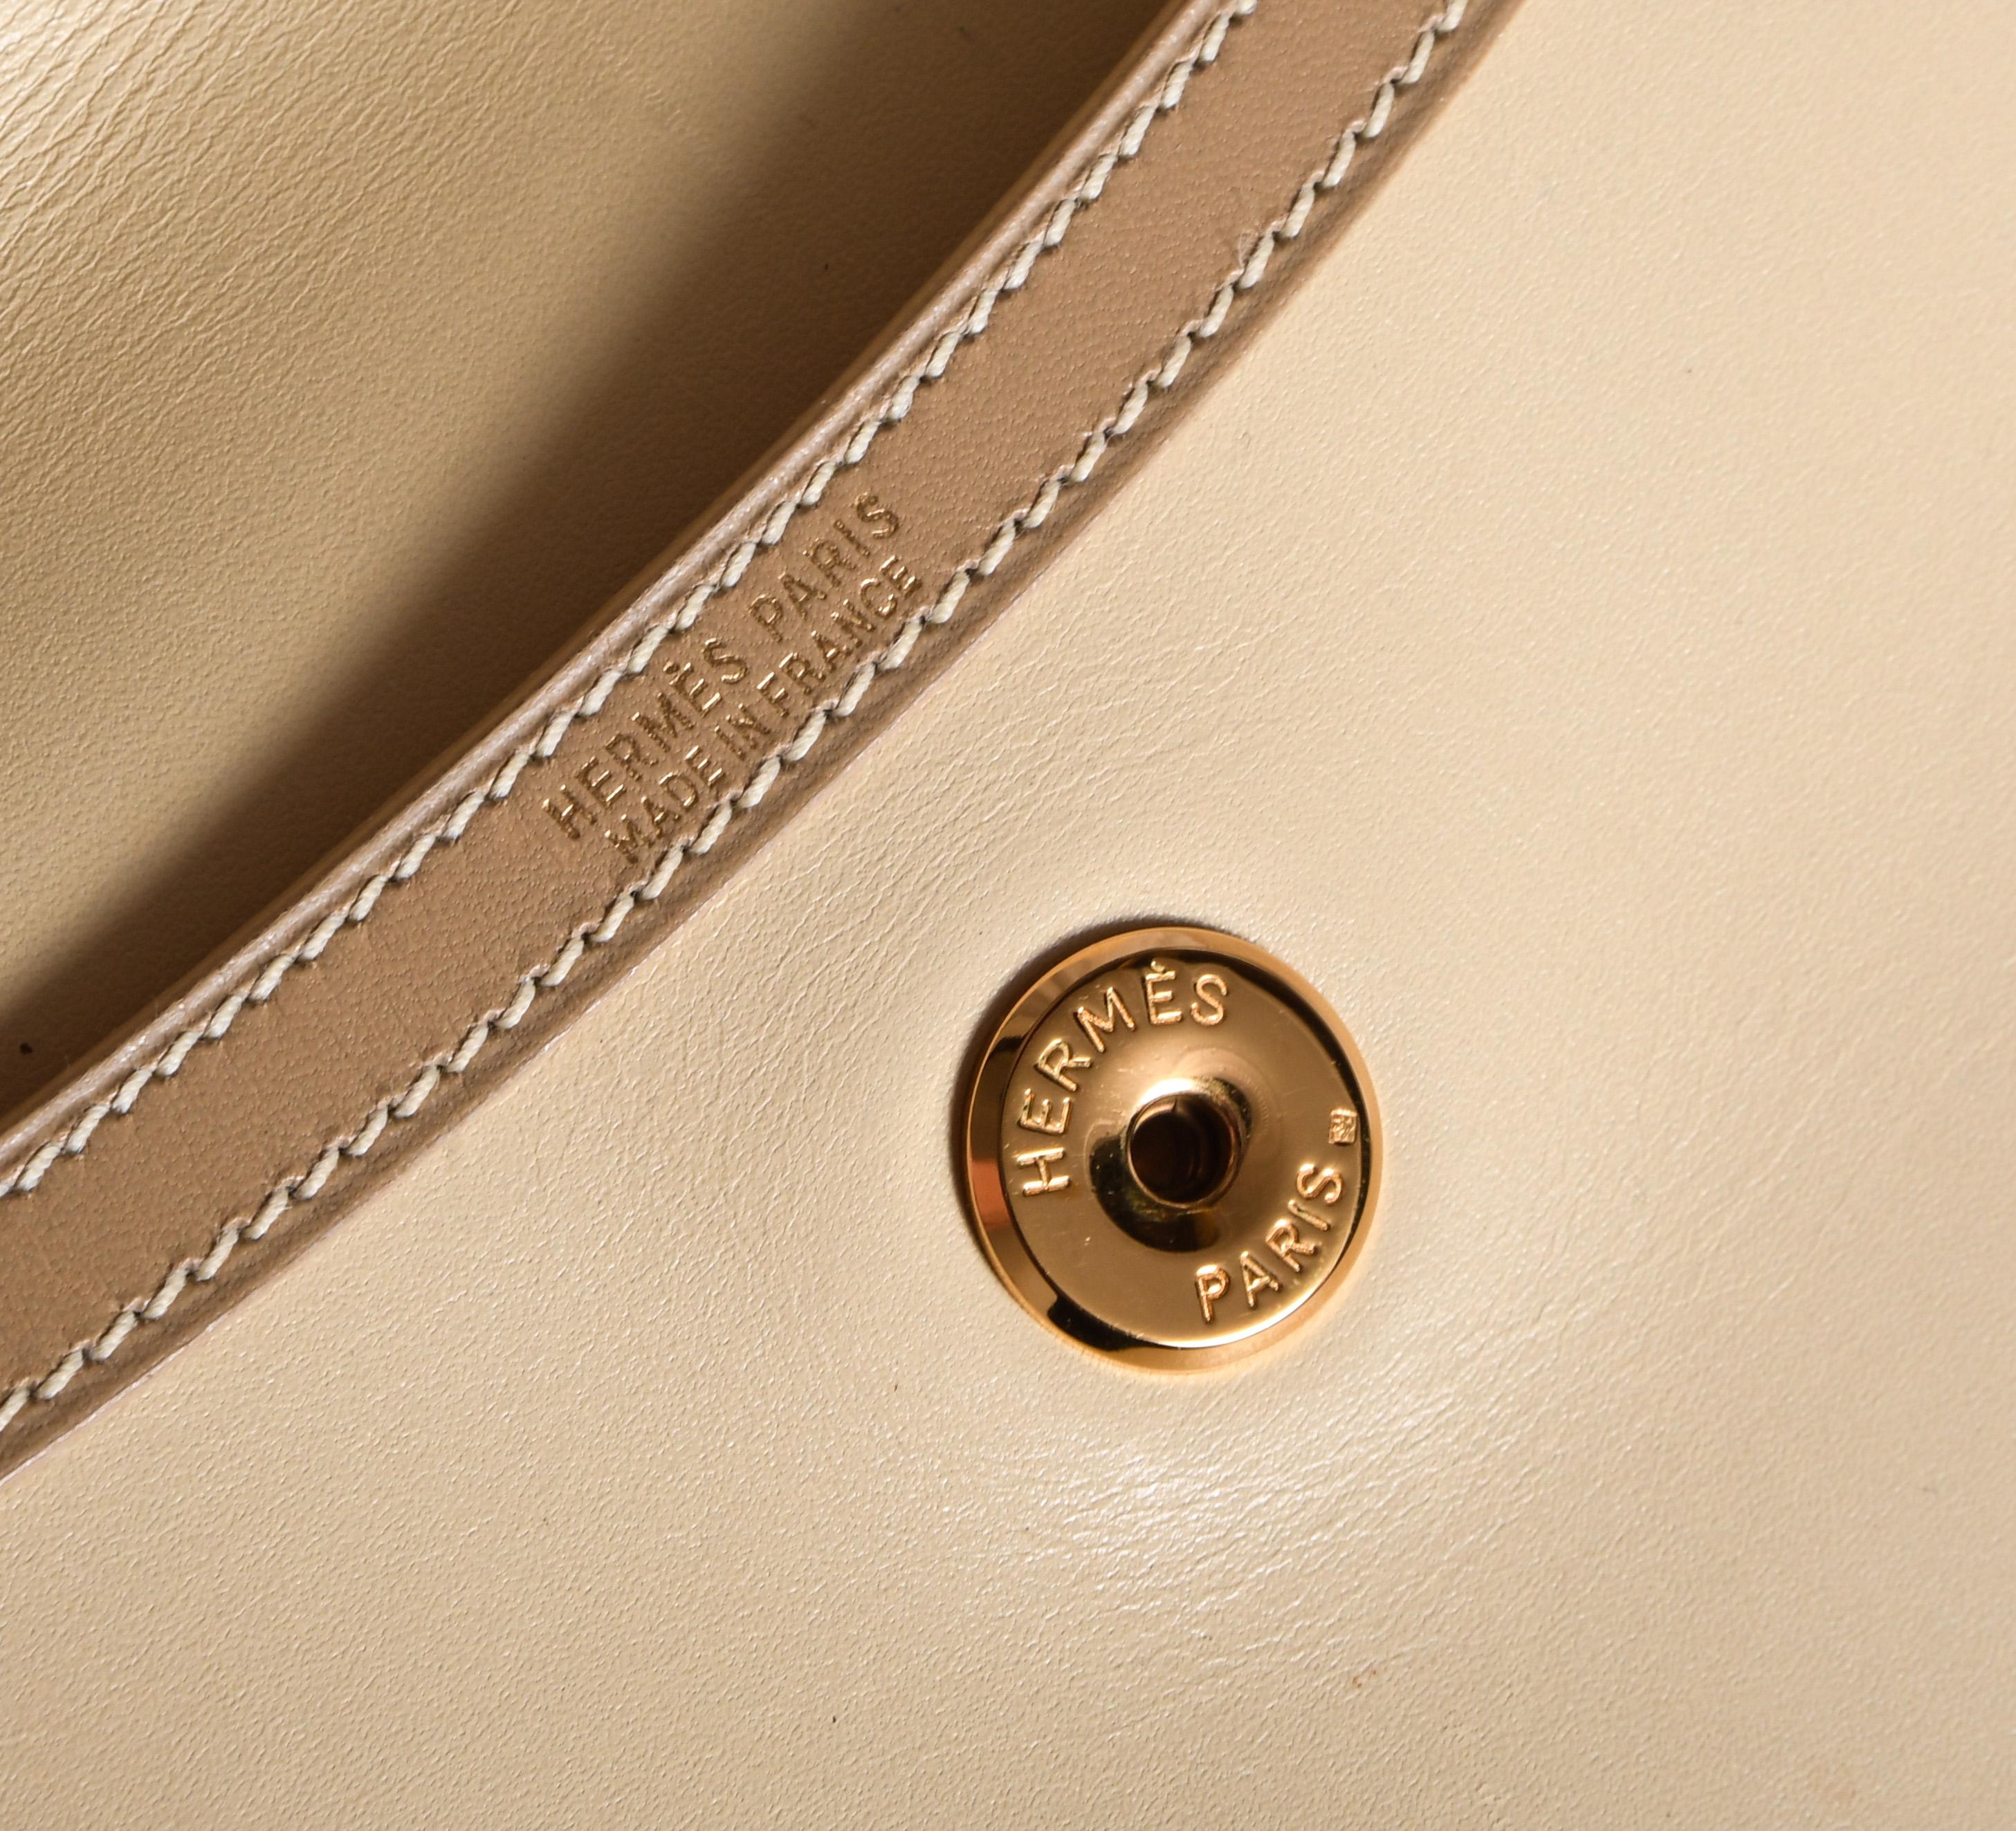 beige leather clutch